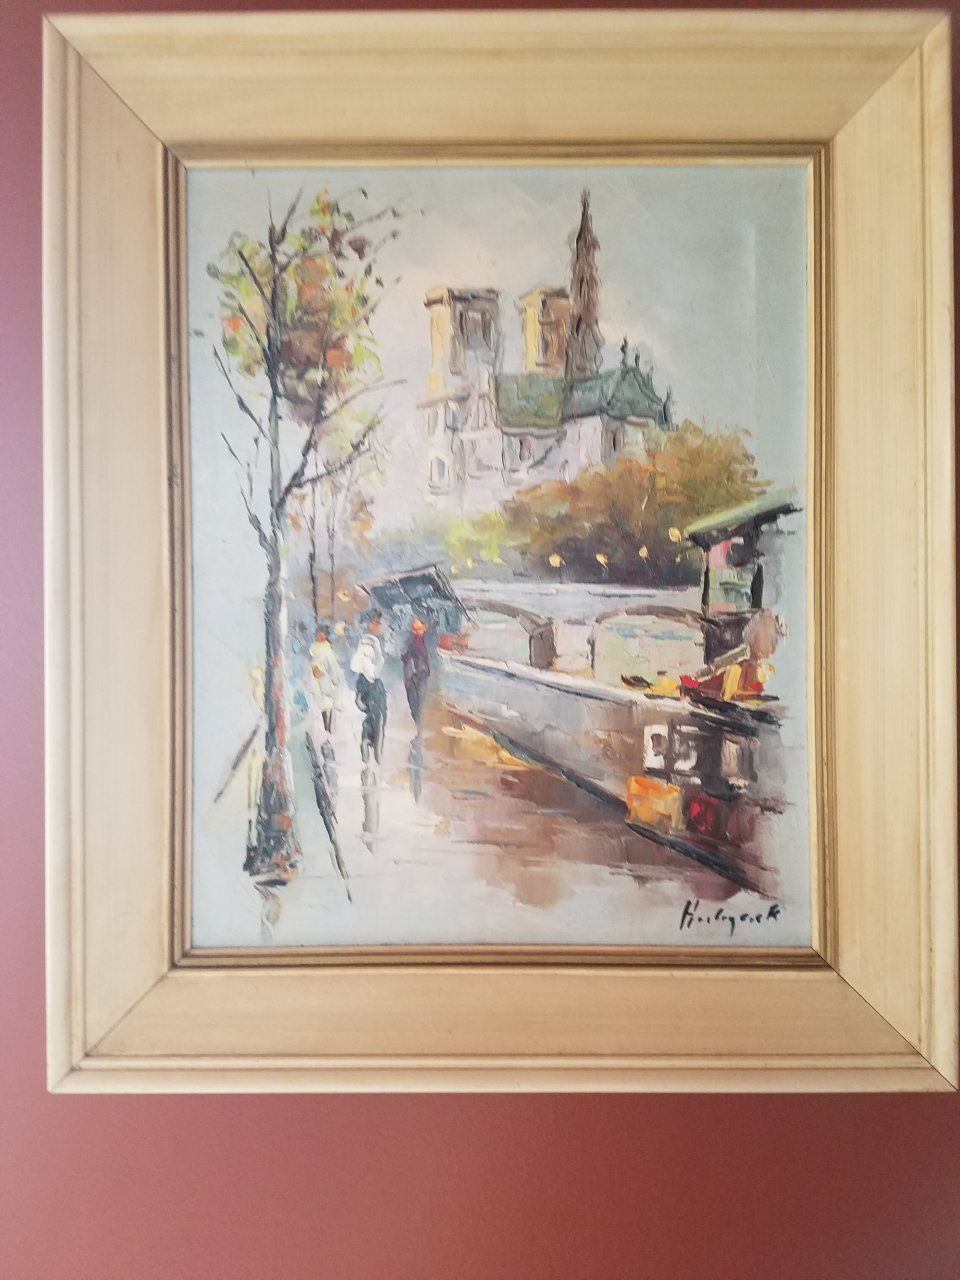 I Have 3 Oil Paintings By This Artist But Can't Make Out